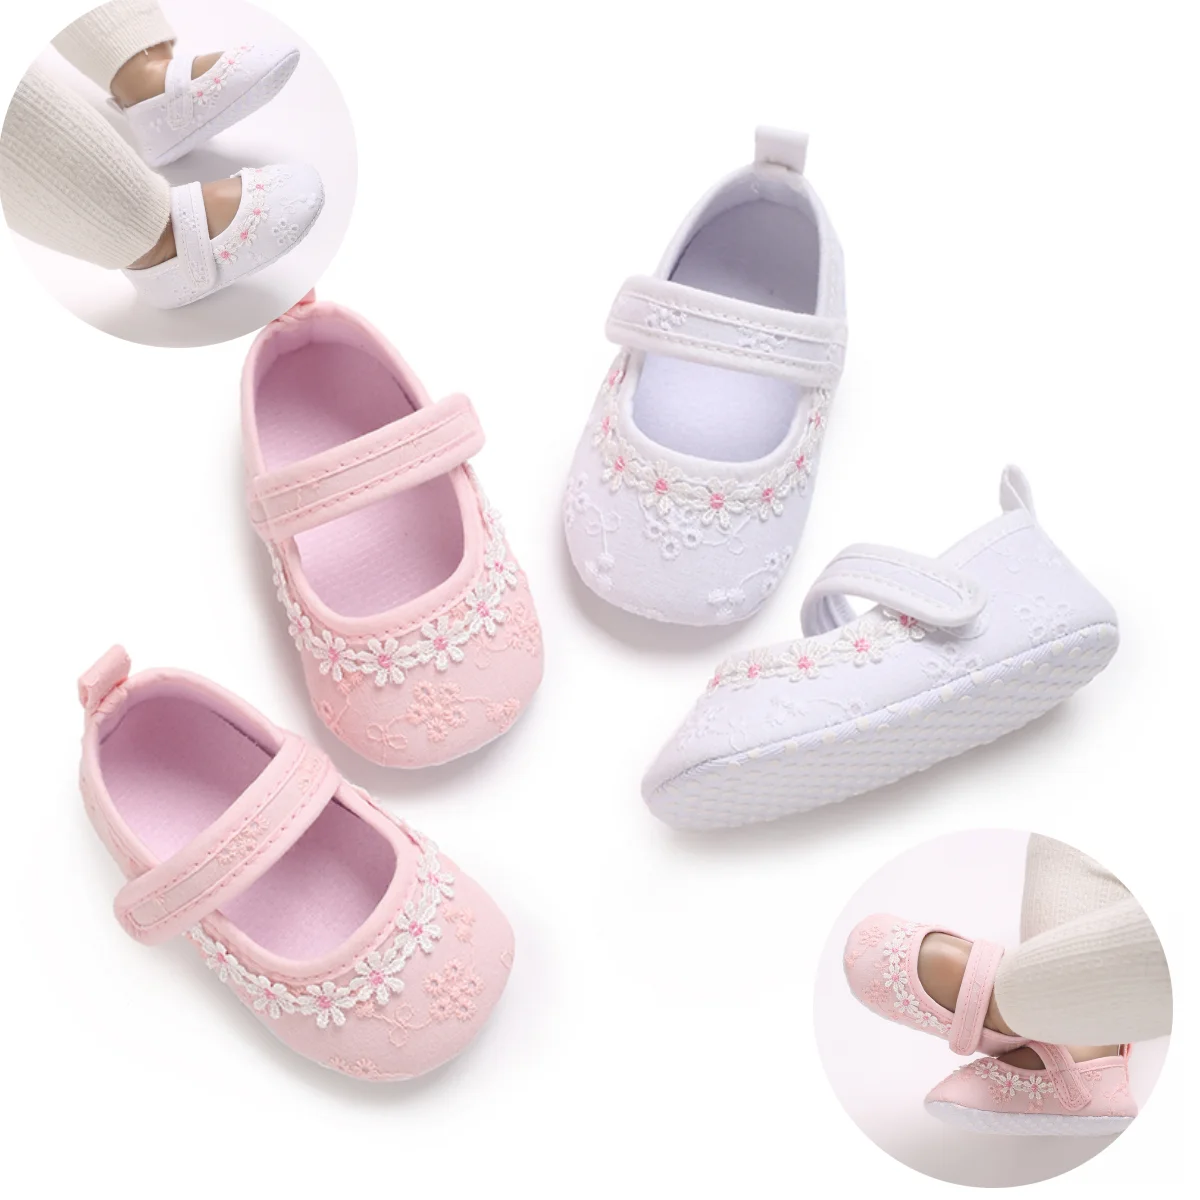 

Baby Girls Shoes Retro Spring Autumn Toddlers Prewalkers Cotton Cute flower embroidery Shoes Infant Soft Bottom First Walkers